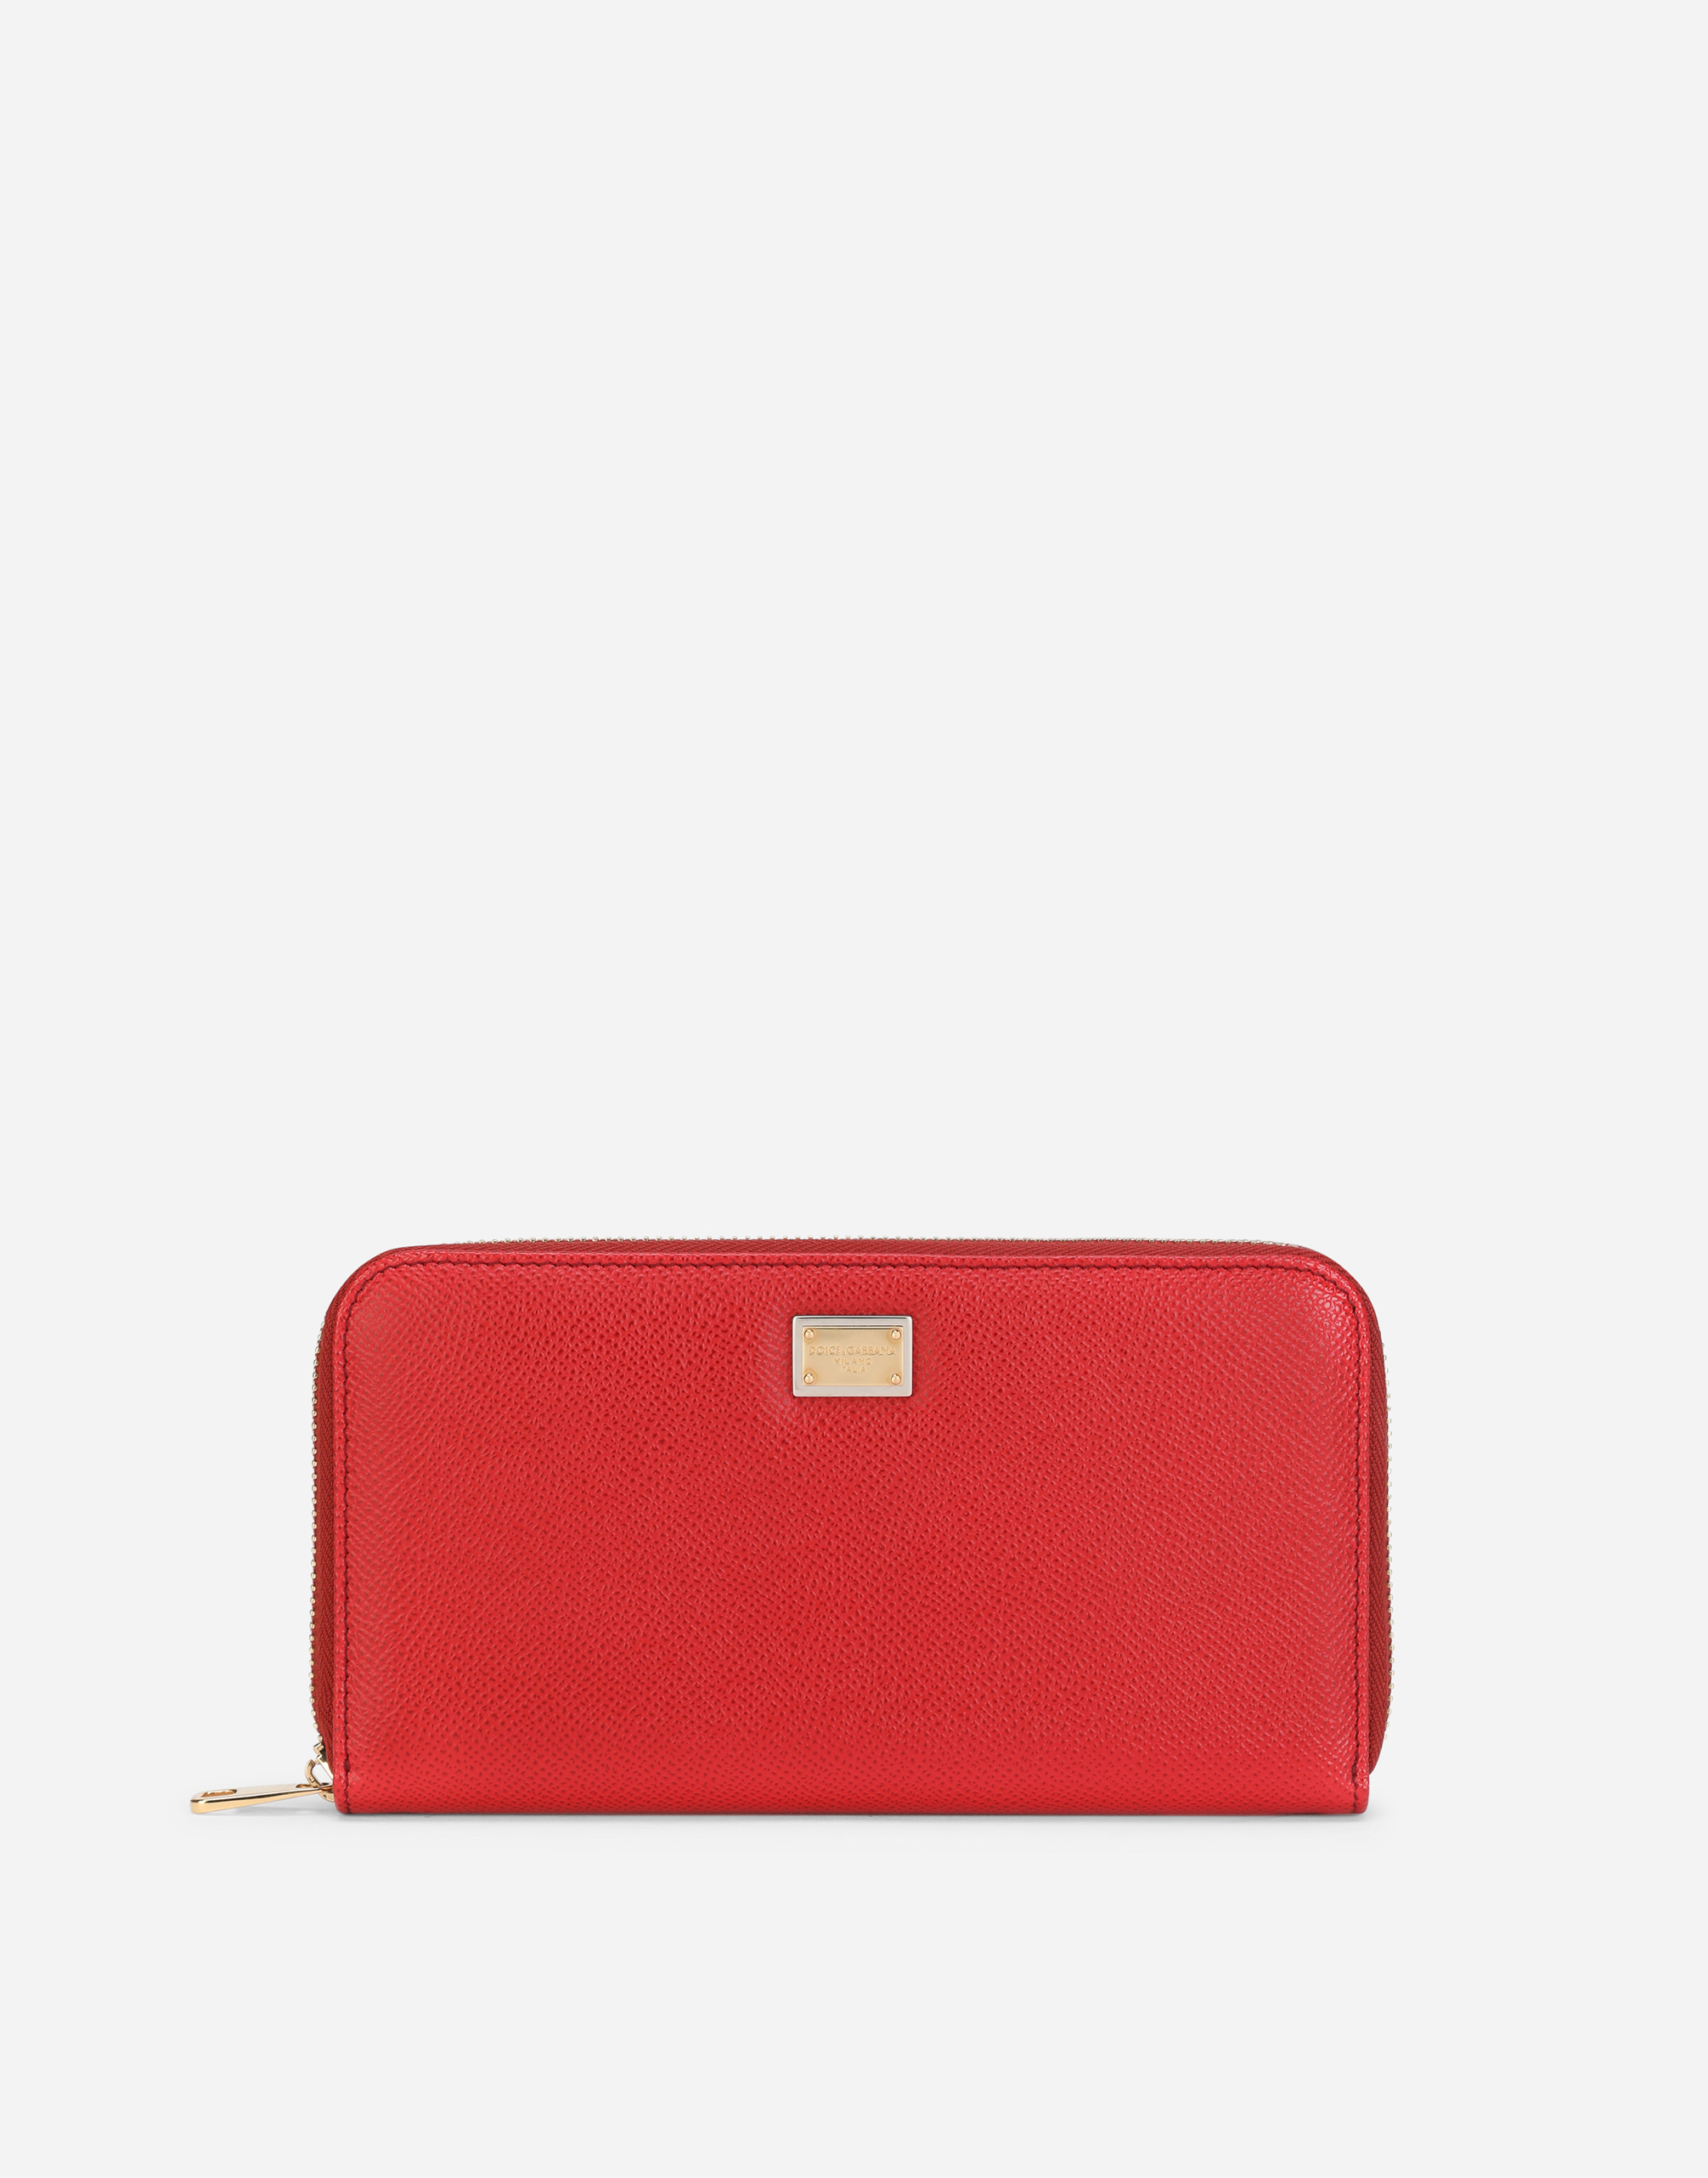 Dauphine leather zip-around wallet in Red